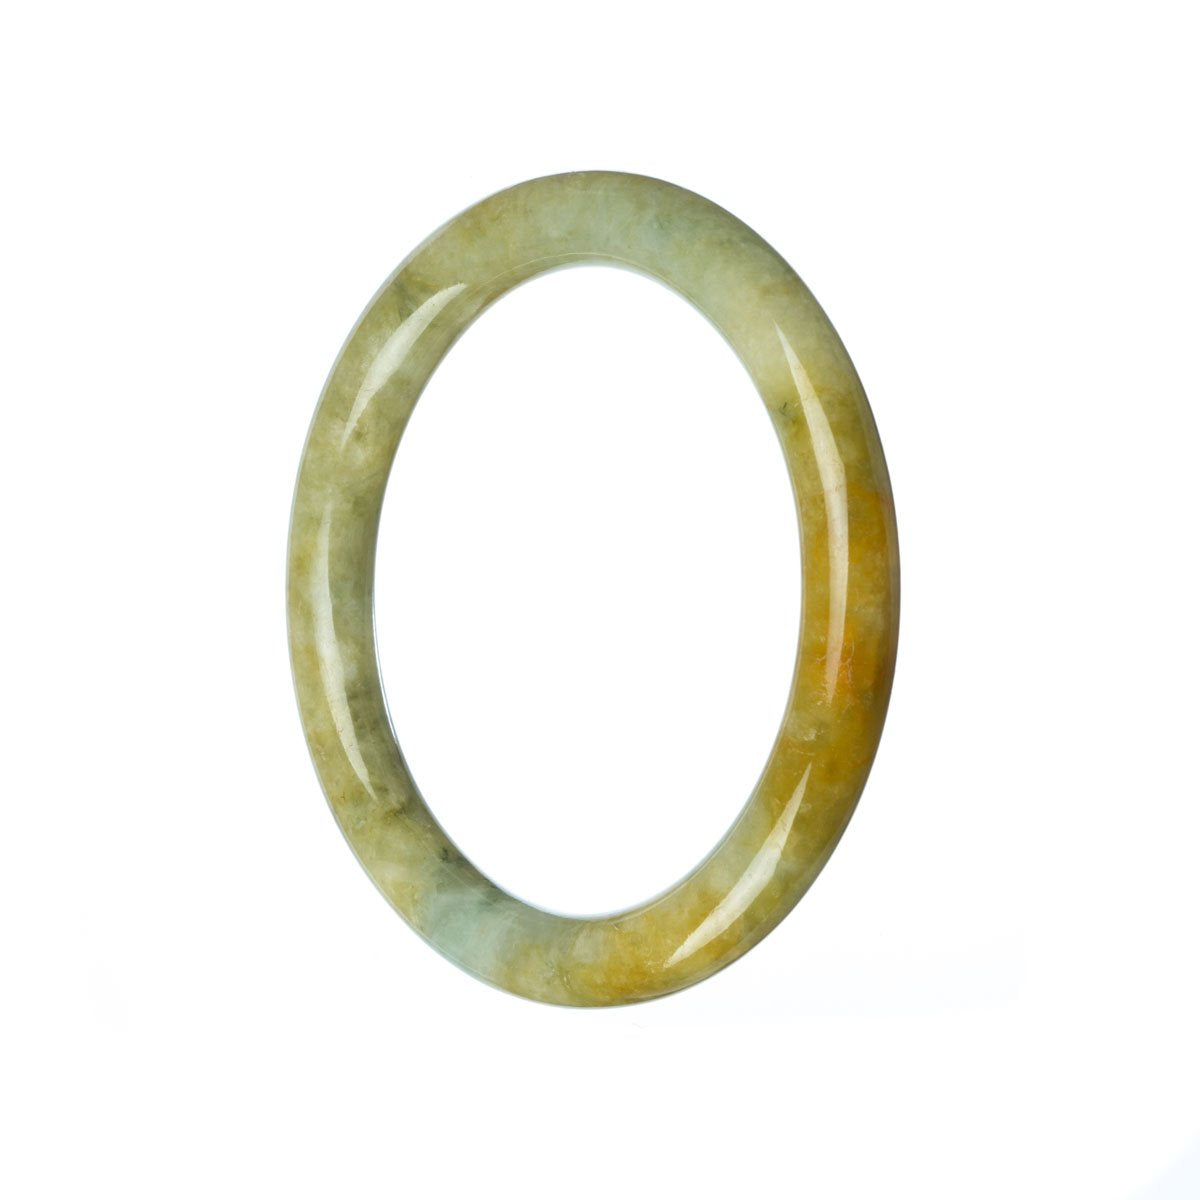 A close-up photo of a petite green and brown Burmese jade bangle bracelet, certified as natural and authentic, with the brand name "MAYS" engraved on it. The bracelet has a diameter of 54mm.